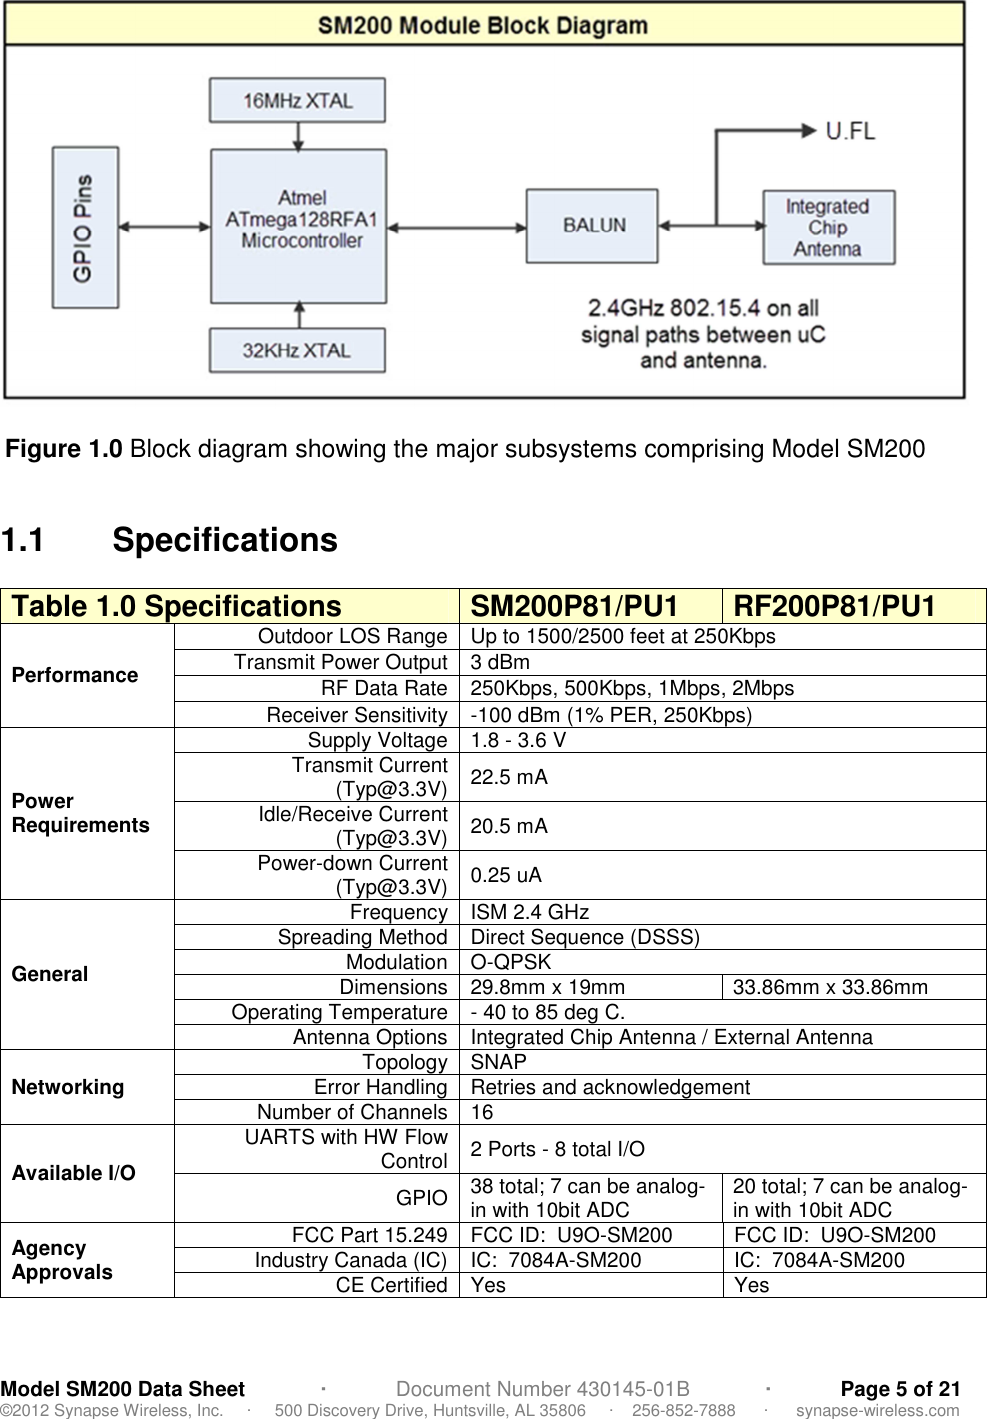 Model SM200 Data Sheet             ·            Document Number 430145-01B             ·            Page 5 of 21 ©2012 Synapse Wireless, Inc.     ·     500 Discovery Drive, Huntsville, AL 35806     ·    256-852-7888      ·      synapse-wireless.com    Figure 1.0 Block diagram showing the major subsystems comprising Model SM200  1.1  Specifications  Table 1.0 Specifications  SM200P81/PU1  RF200P81/PU1 Performance Outdoor LOS Range Up to 1500/2500 feet at 250Kbps Transmit Power Output 3 dBm RF Data Rate 250Kbps, 500Kbps, 1Mbps, 2Mbps Receiver Sensitivity -100 dBm (1% PER, 250Kbps) Power Requirements Supply Voltage 1.8 - 3.6 V Transmit Current (Typ@3.3V) 22.5 mA Idle/Receive Current (Typ@3.3V) 20.5 mA Power-down Current (Typ@3.3V) 0.25 uA General Frequency ISM 2.4 GHz Spreading Method Direct Sequence (DSSS) Modulation O-QPSK Dimensions 29.8mm x 19mm  33.86mm x 33.86mm Operating Temperature - 40 to 85 deg C. Antenna Options Integrated Chip Antenna / External Antenna Networking Topology SNAP Error Handling Retries and acknowledgement Number of Channels 16 Available I/O UARTS with HW Flow Control 2 Ports - 8 total I/O GPIO 38 total; 7 can be analog-in with 10bit ADC  20 total; 7 can be analog-in with 10bit ADC Agency Approvals FCC Part 15.249 FCC ID:  U9O-SM200  FCC ID:  U9O-SM200 Industry Canada (IC) IC:  7084A-SM200  IC:  7084A-SM200 CE Certified Yes  Yes 